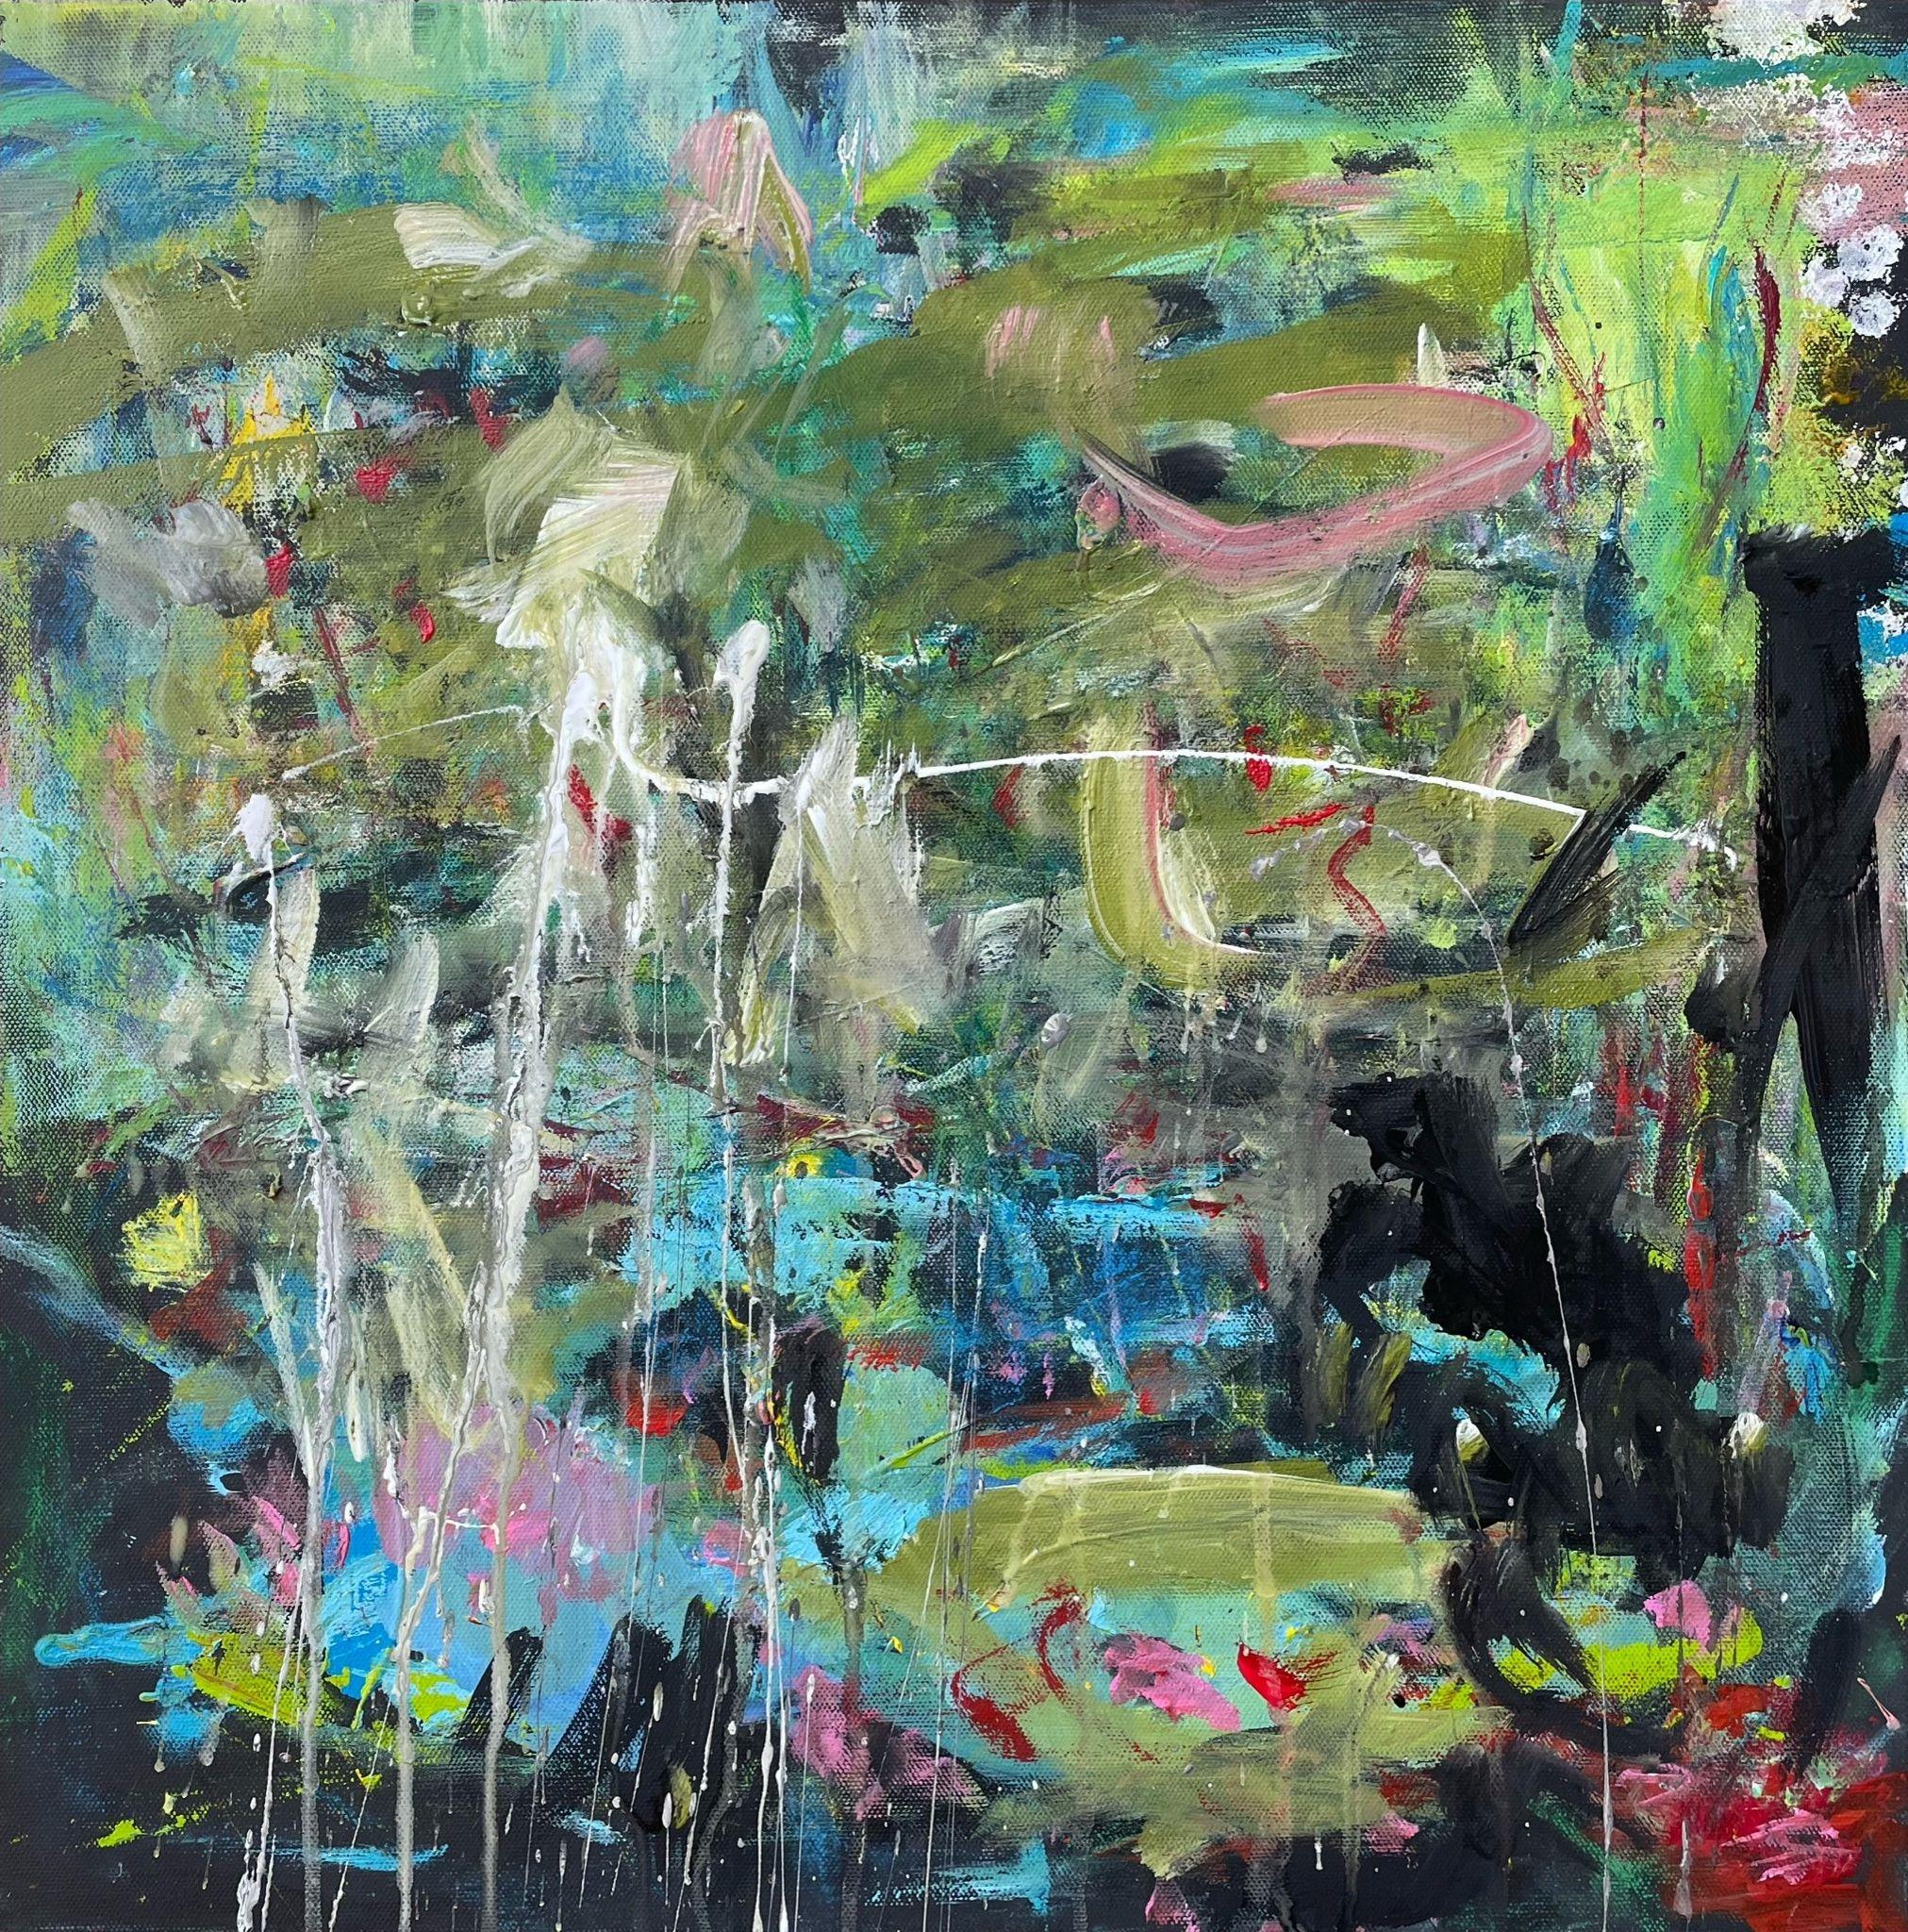 This painting is inspired by Monet's paintings of his waterlily pond in Giverny, France.     The main colors of the painting are black, turquoise, green of various shades and pink. The painting is signed on the back, there is also the title and the